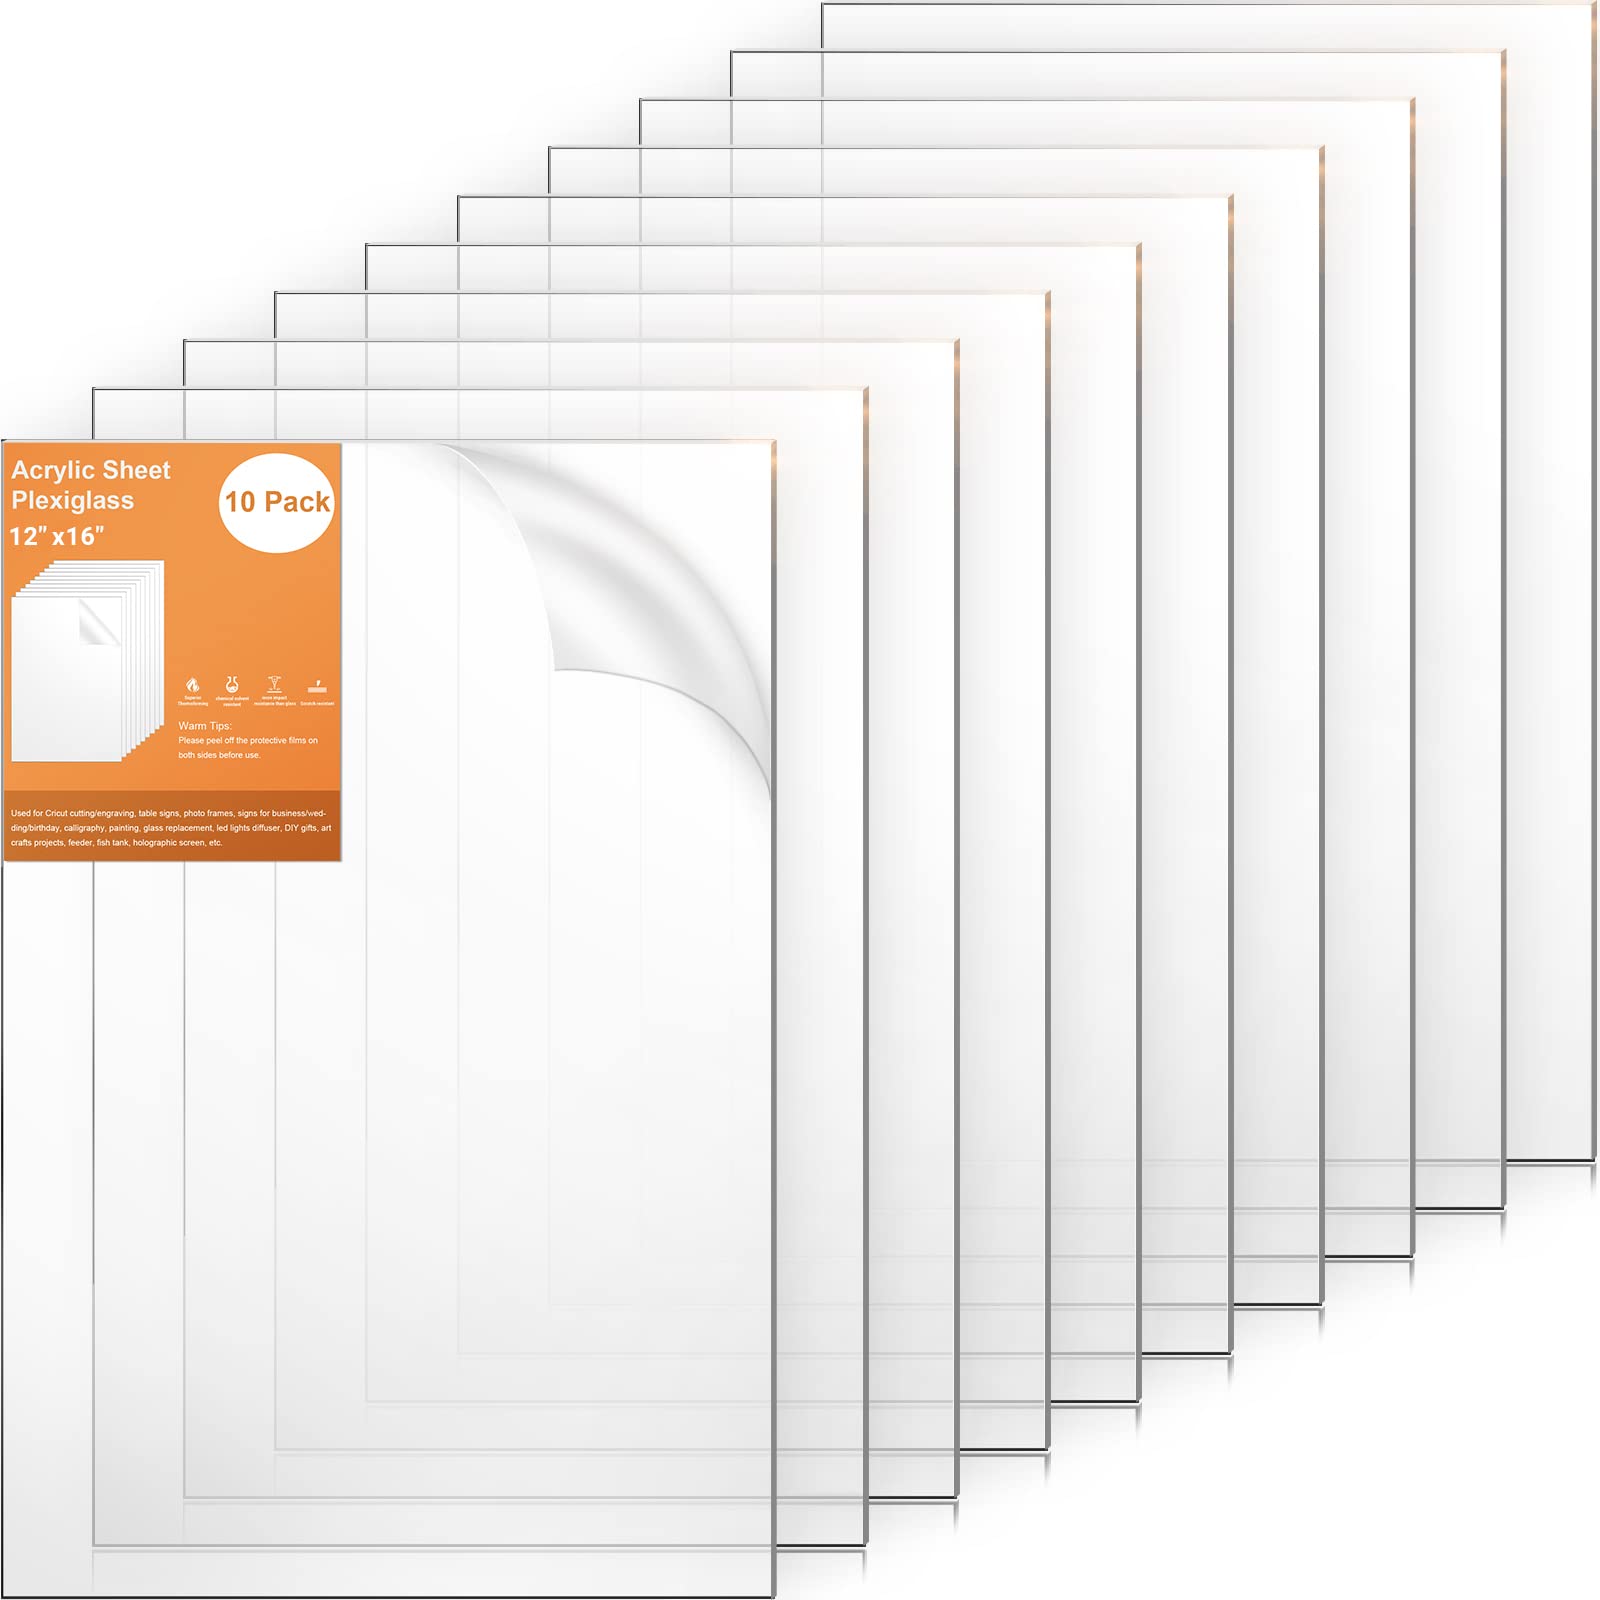 Set of 4, White Acrylic Square Plexiglass Sheets, 3mm Thick Top Plates  With Protective Film - Assorted Sizes